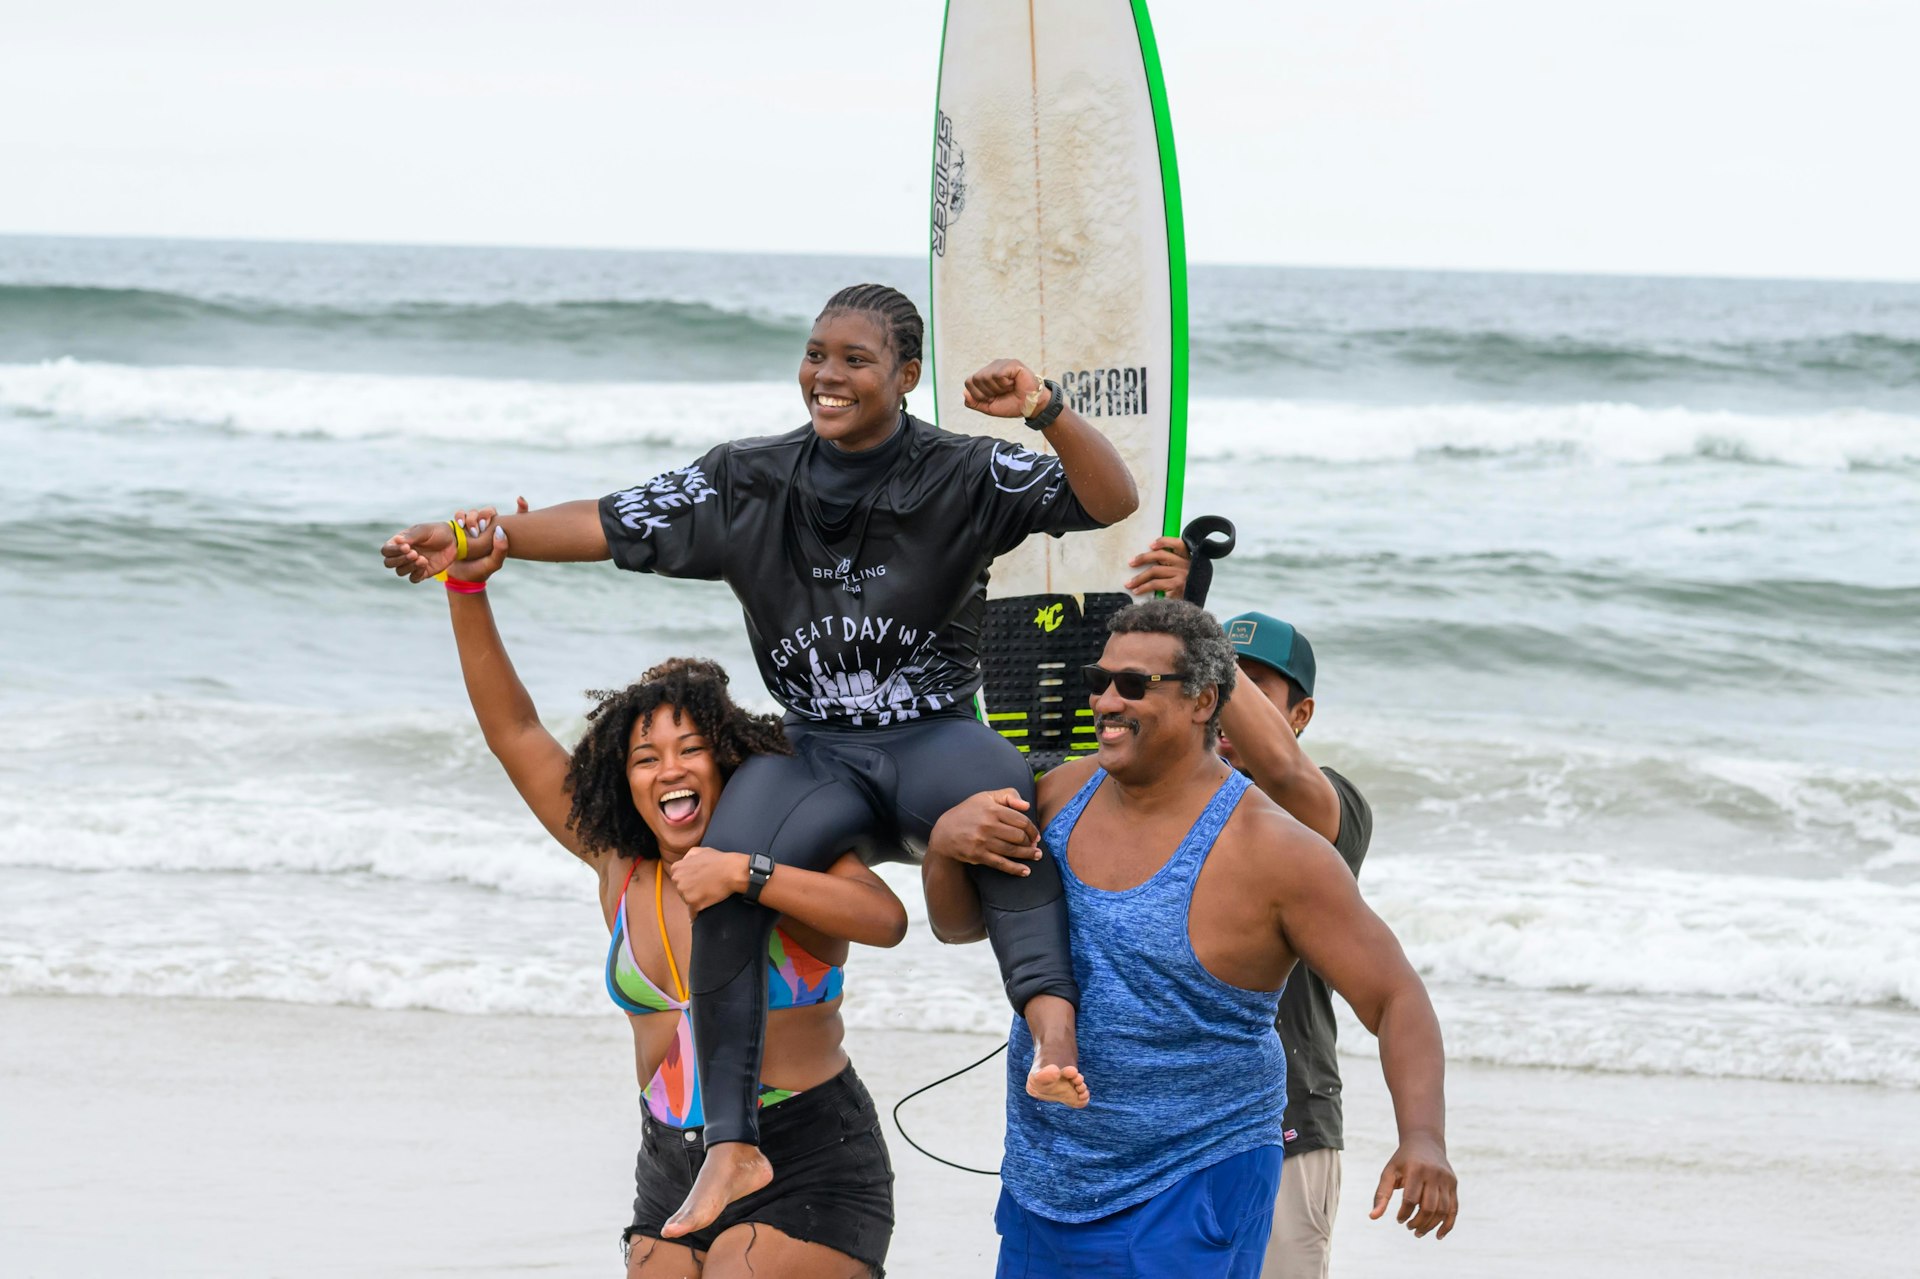 The Black surfers paddling out for the love of the ocean